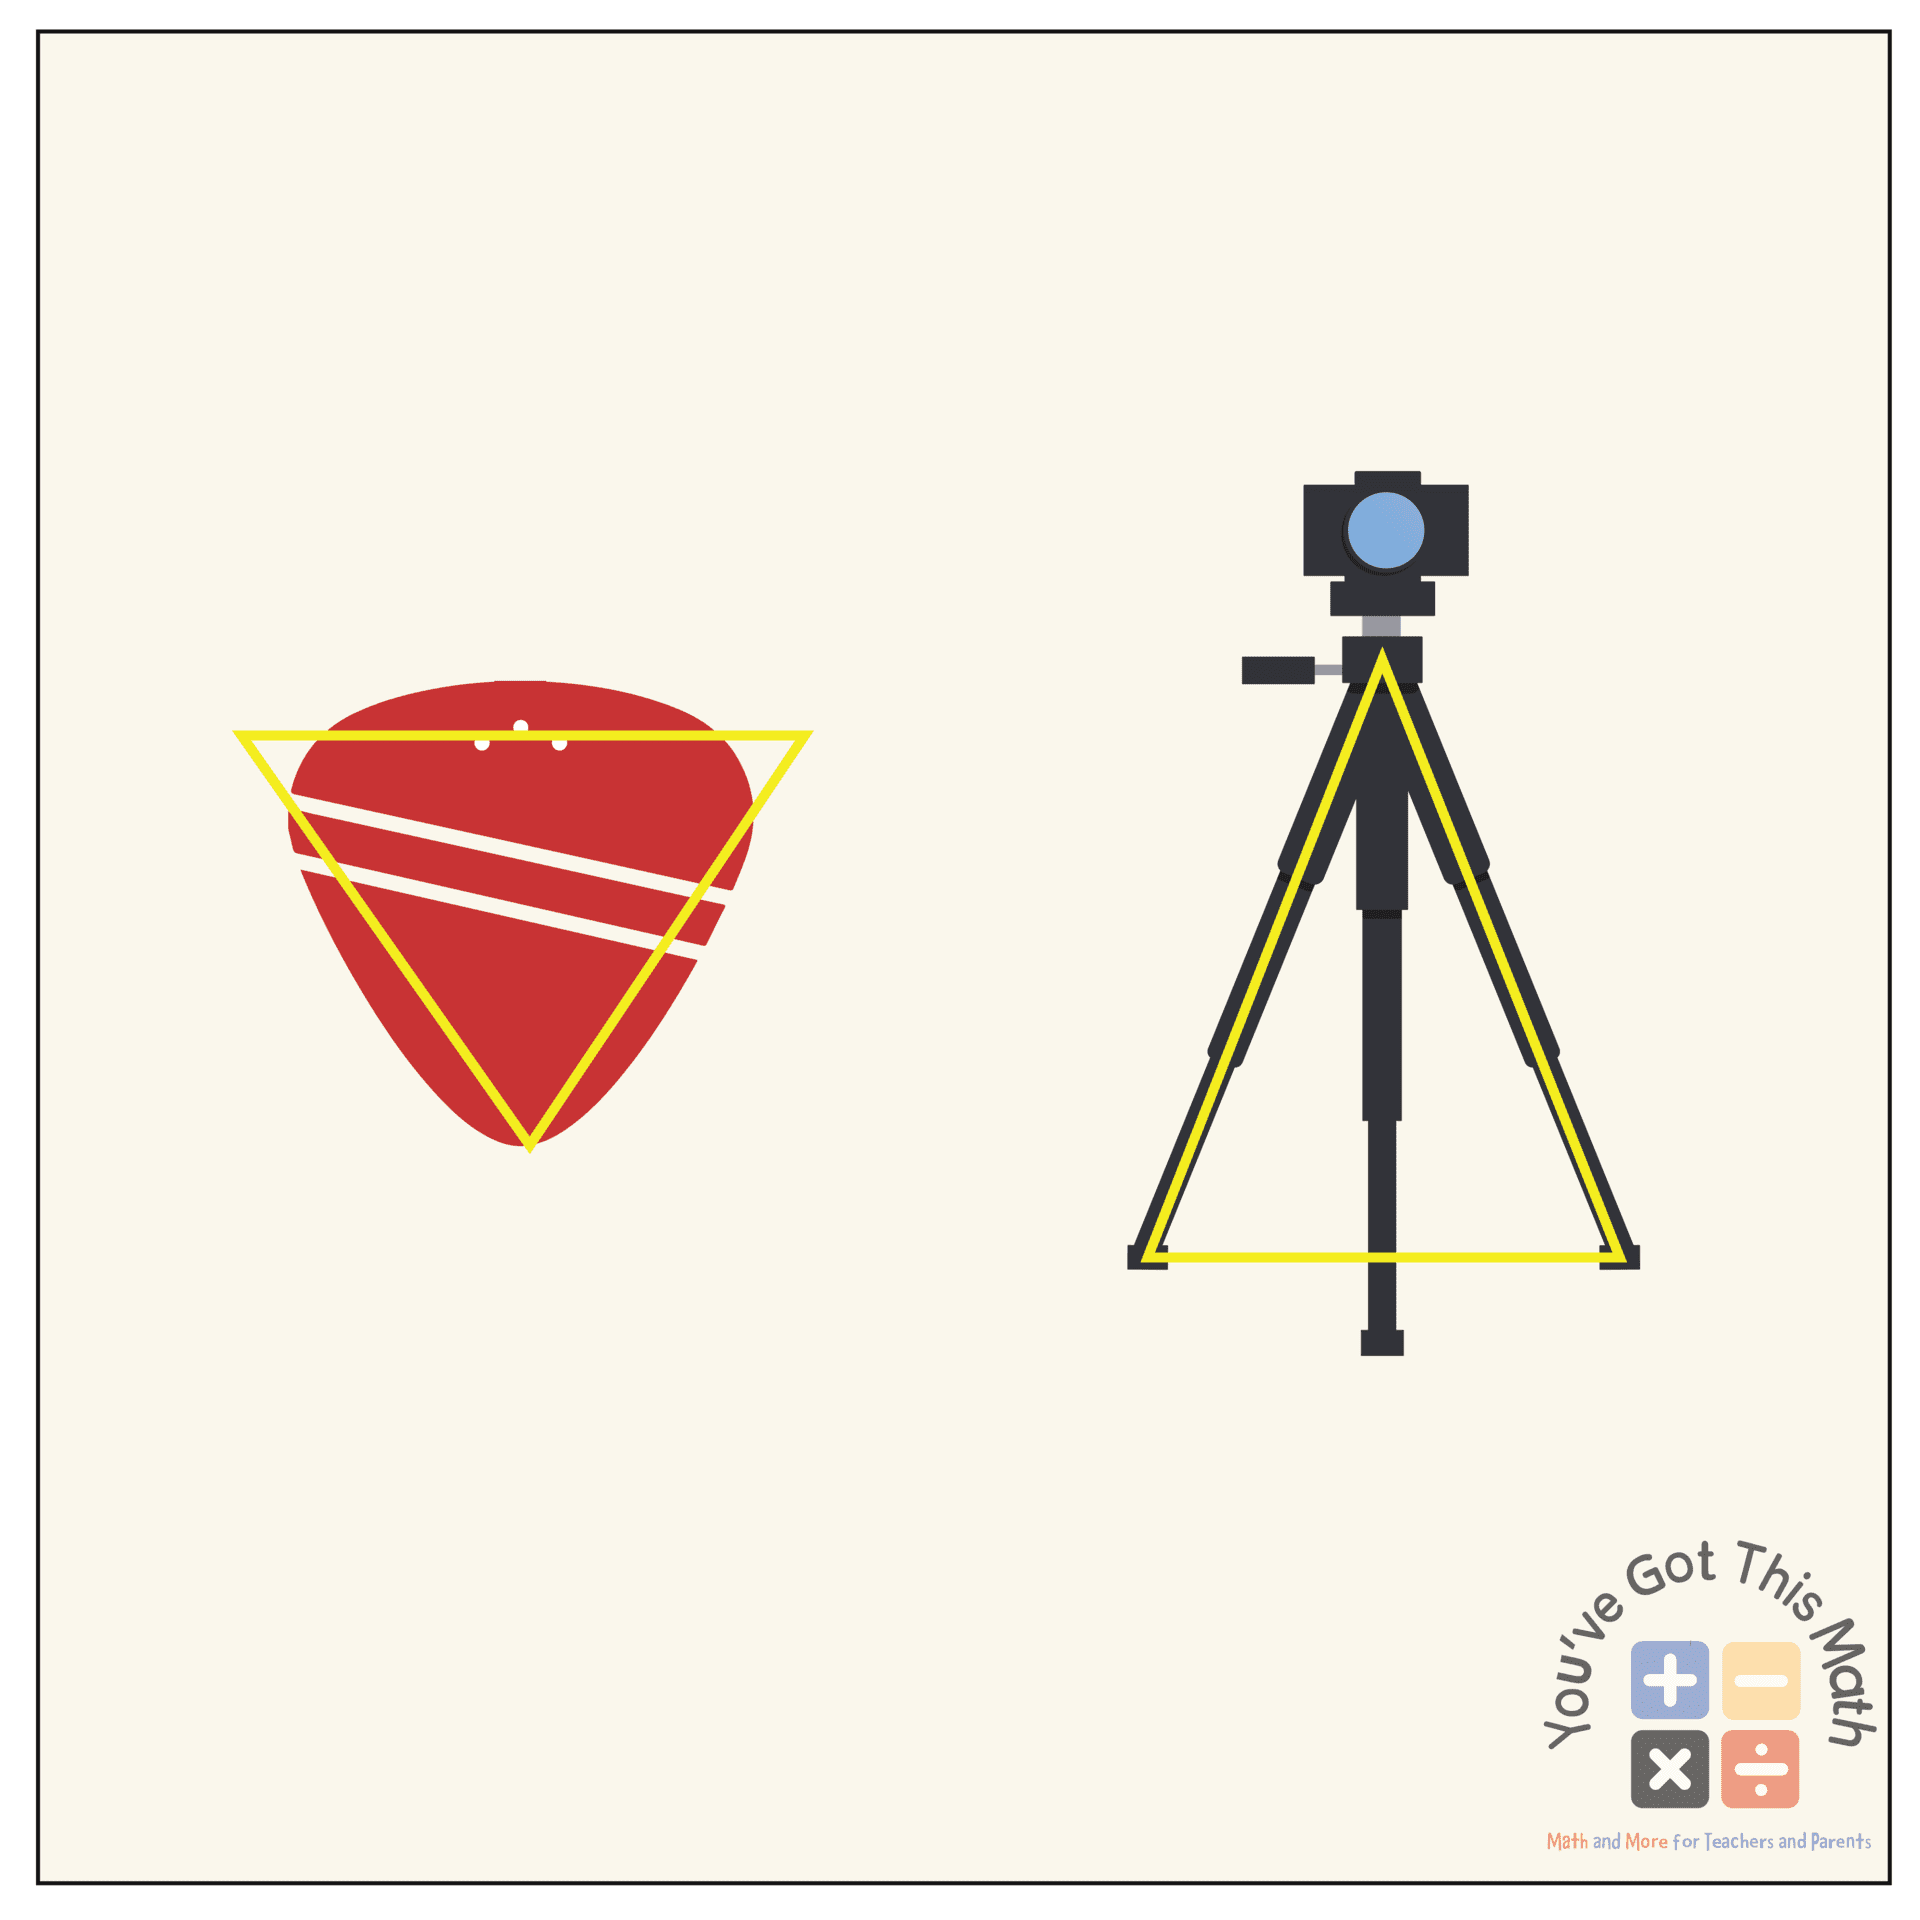 Guitar Picks and Camera Tripods as the Examples of Isosceles Triangle